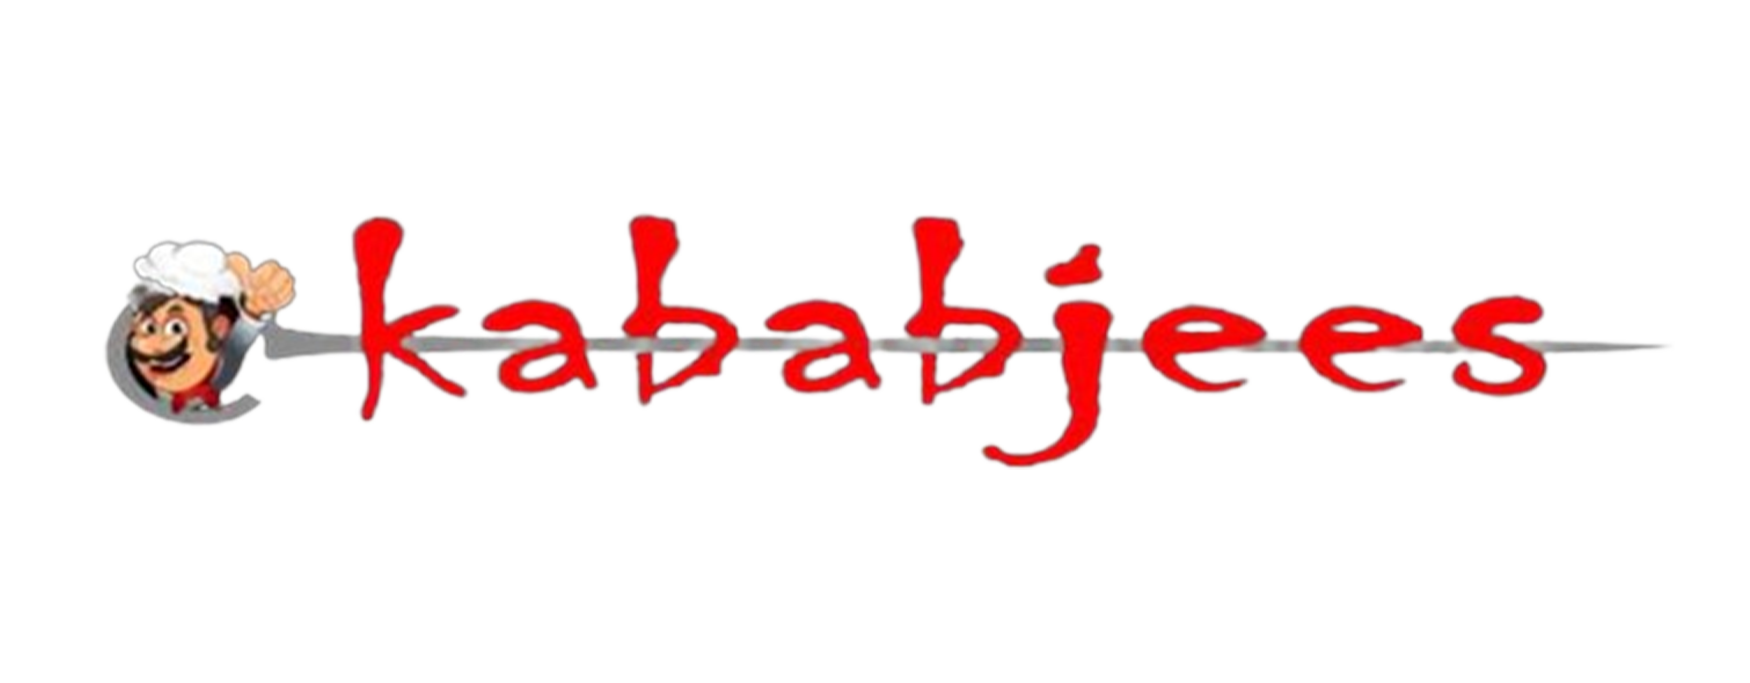 KABABJEES